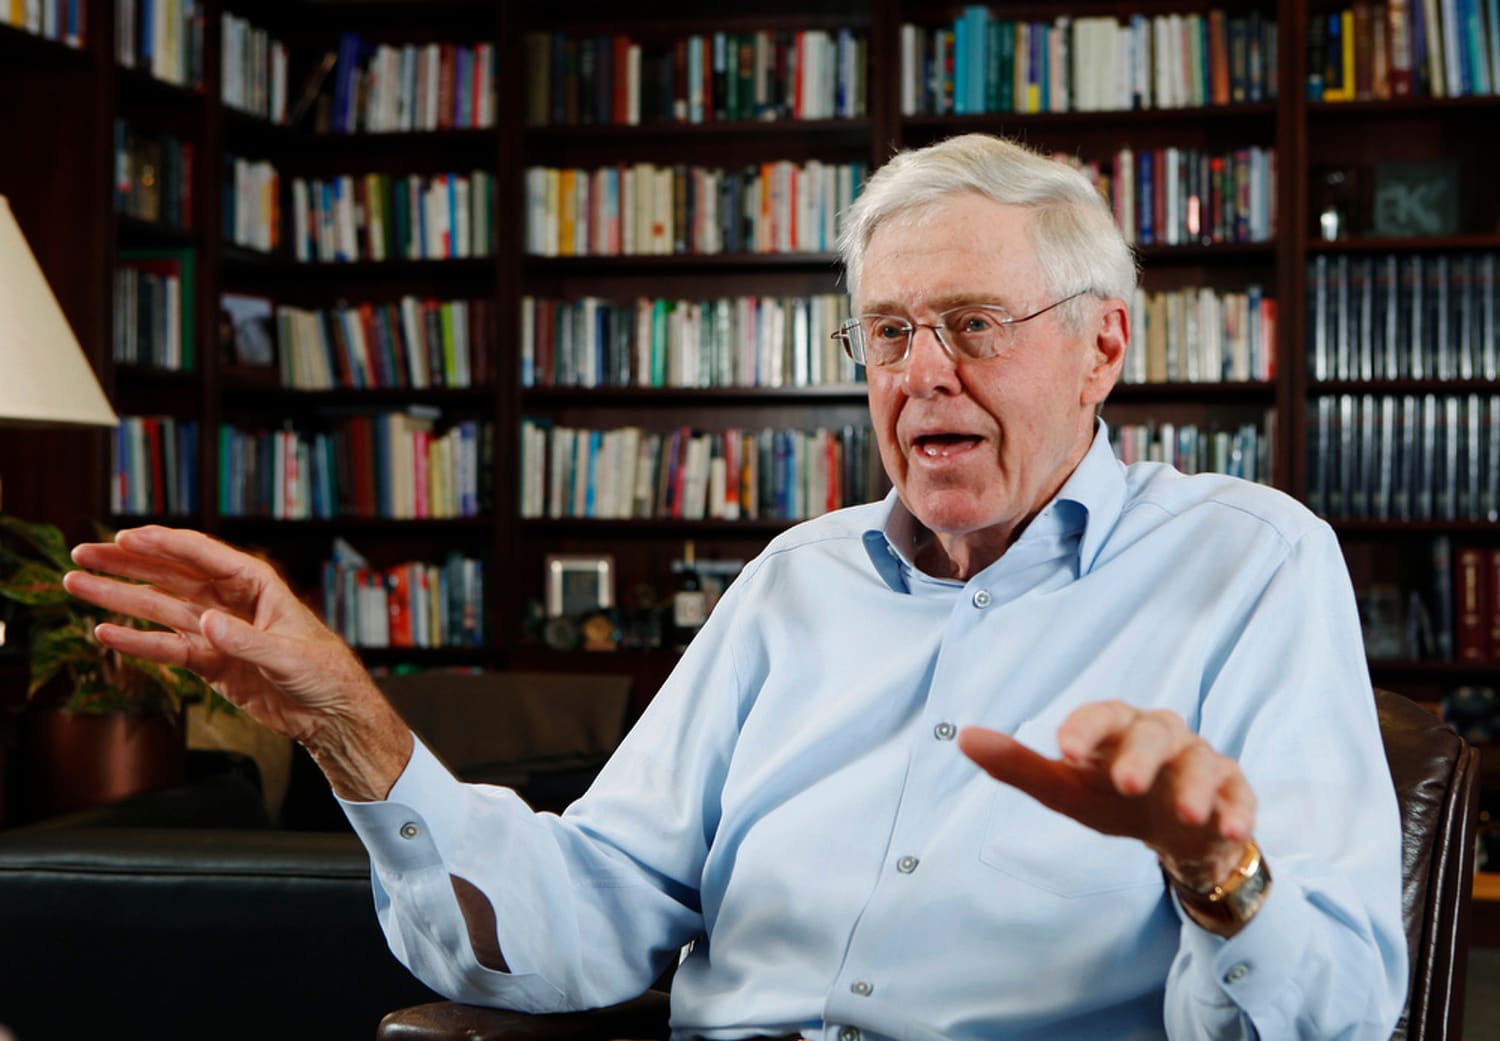 Koch group to back GOP presidential candidate who will ‘write new chapter for the country’